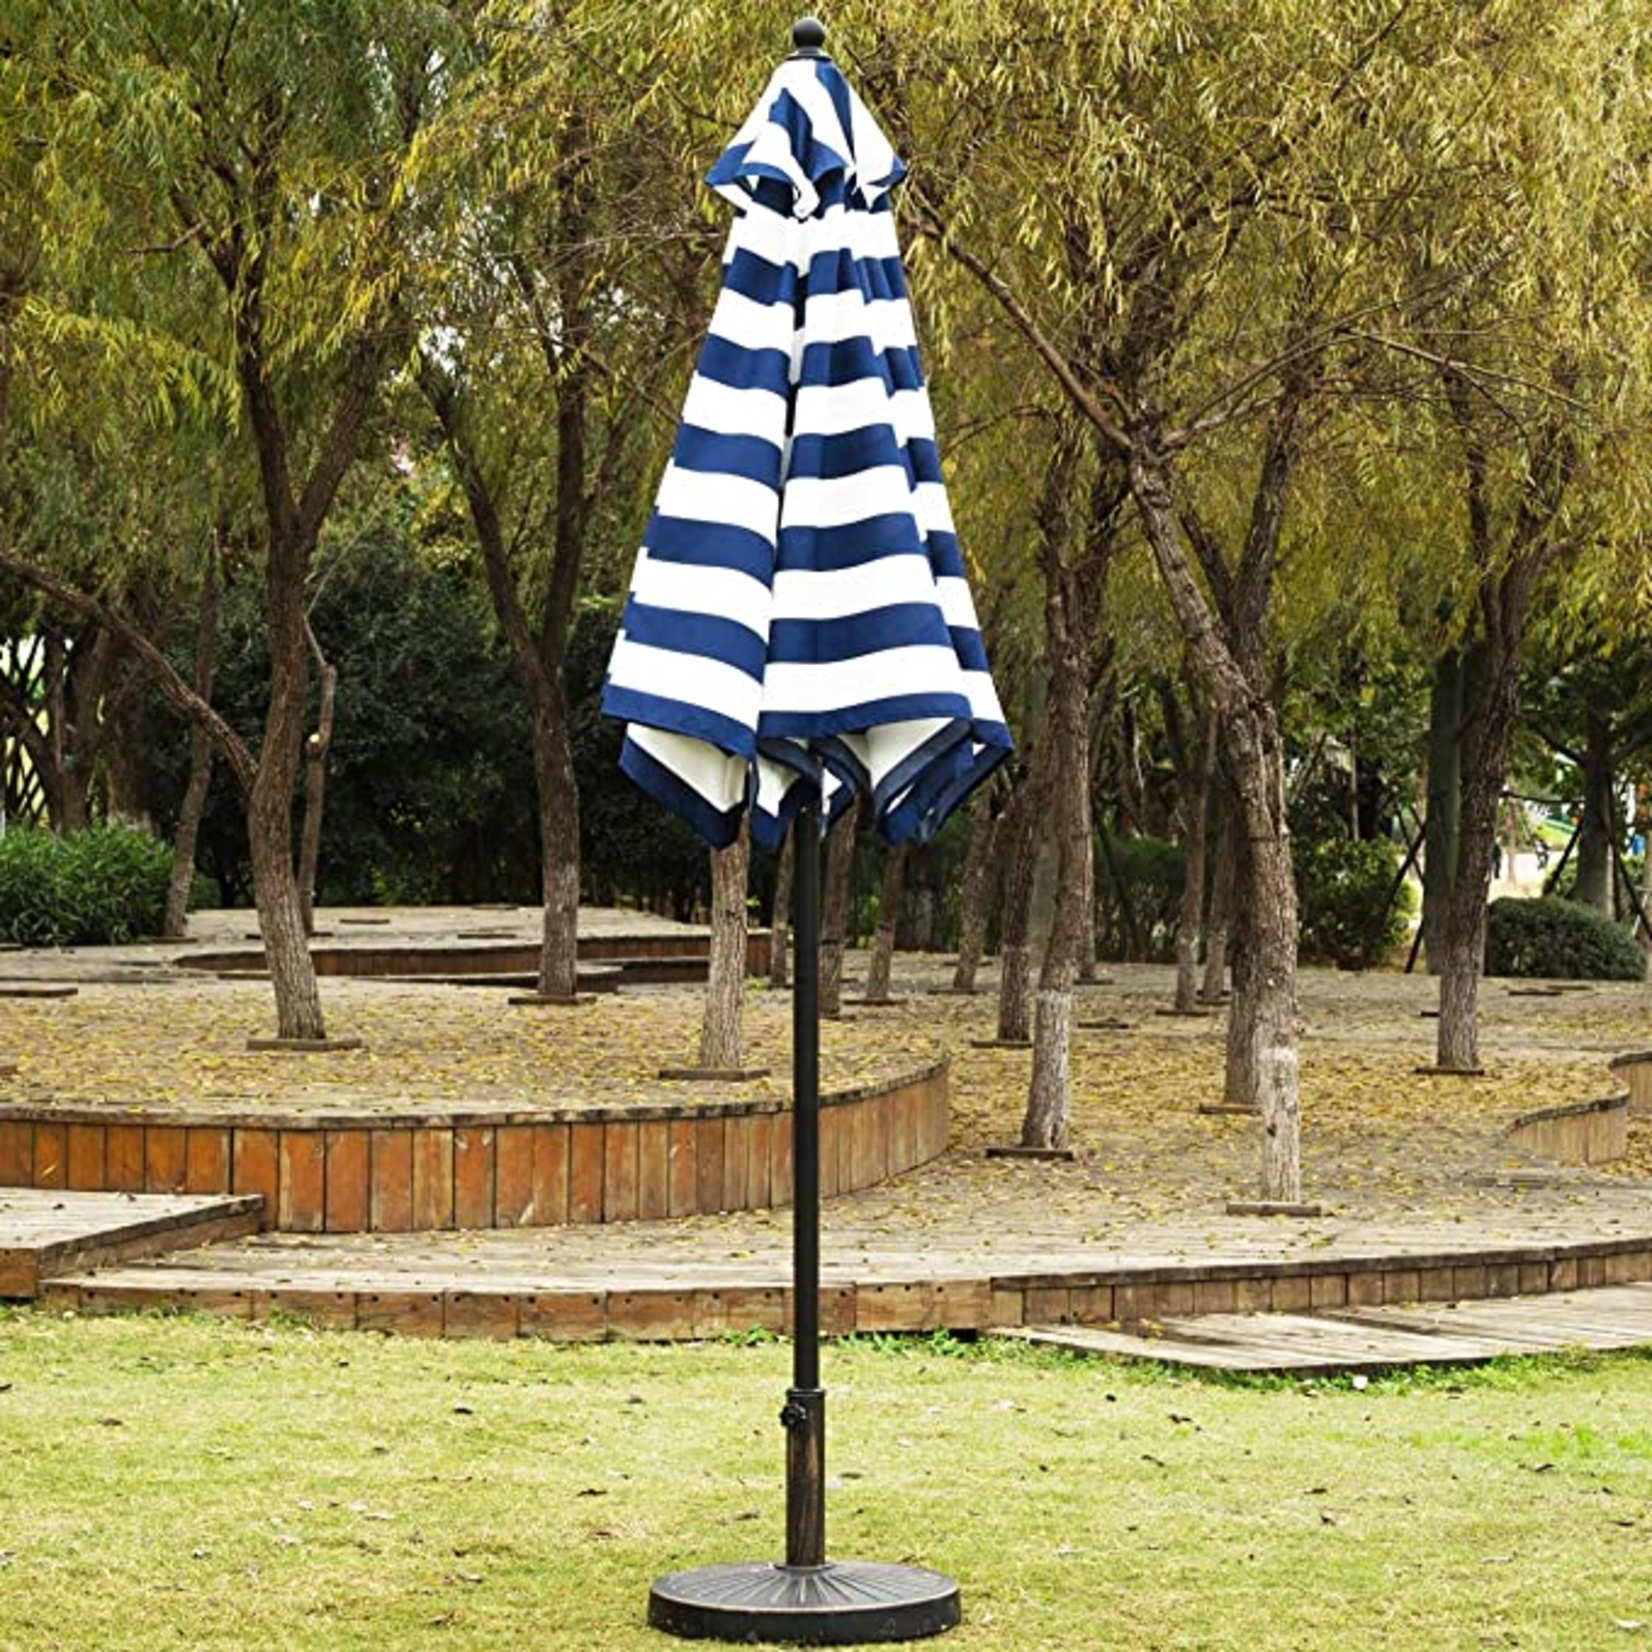 9' Patio Umbrella Outdoor Table Umbrella with 8 Sturdy Ribs NAVY/WHITE **Base not included**